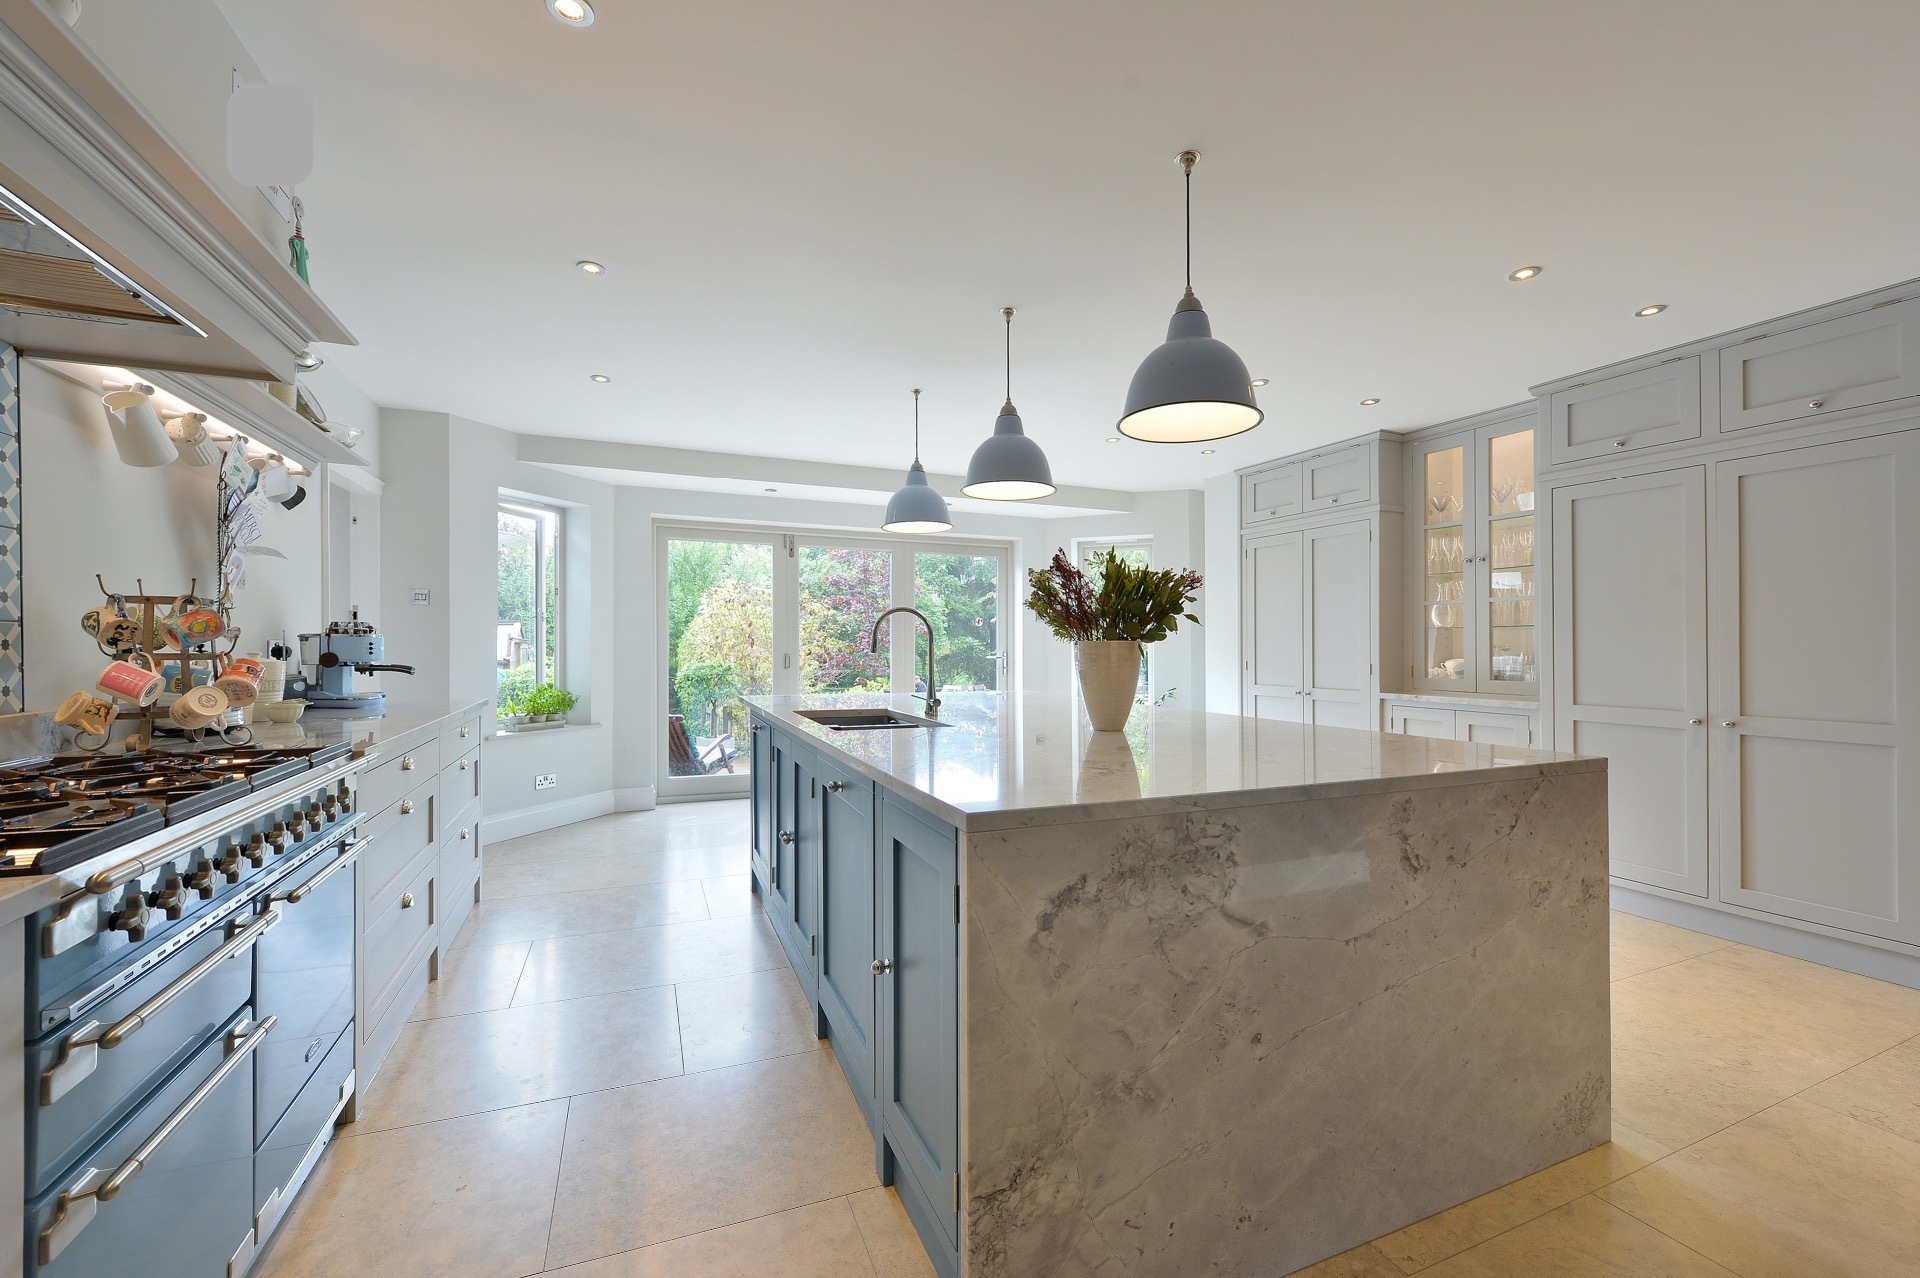 Kitchen created from knocking together smaller, unused rooms